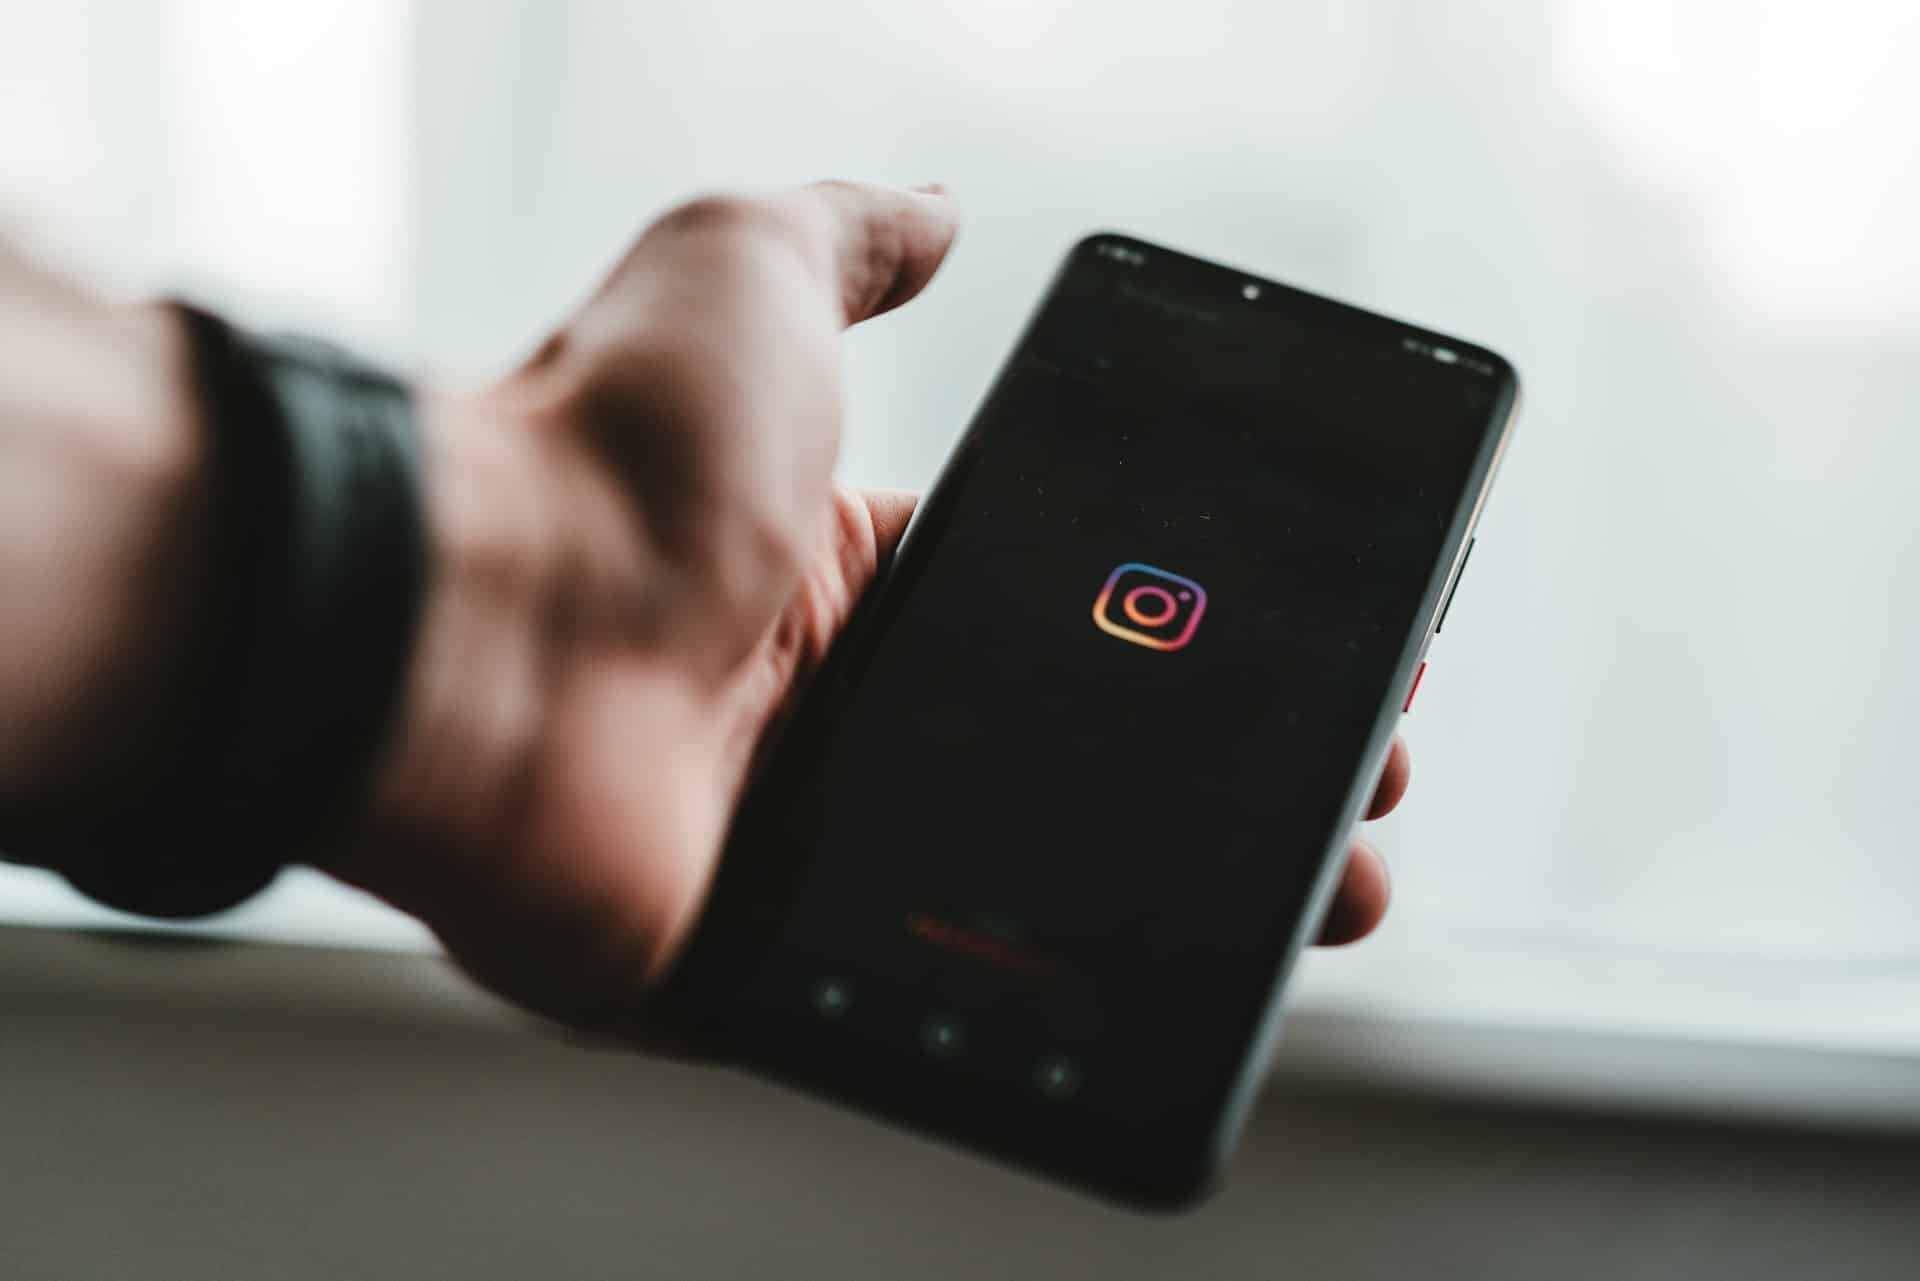 Instagram new feature designed to restrict abusive messages